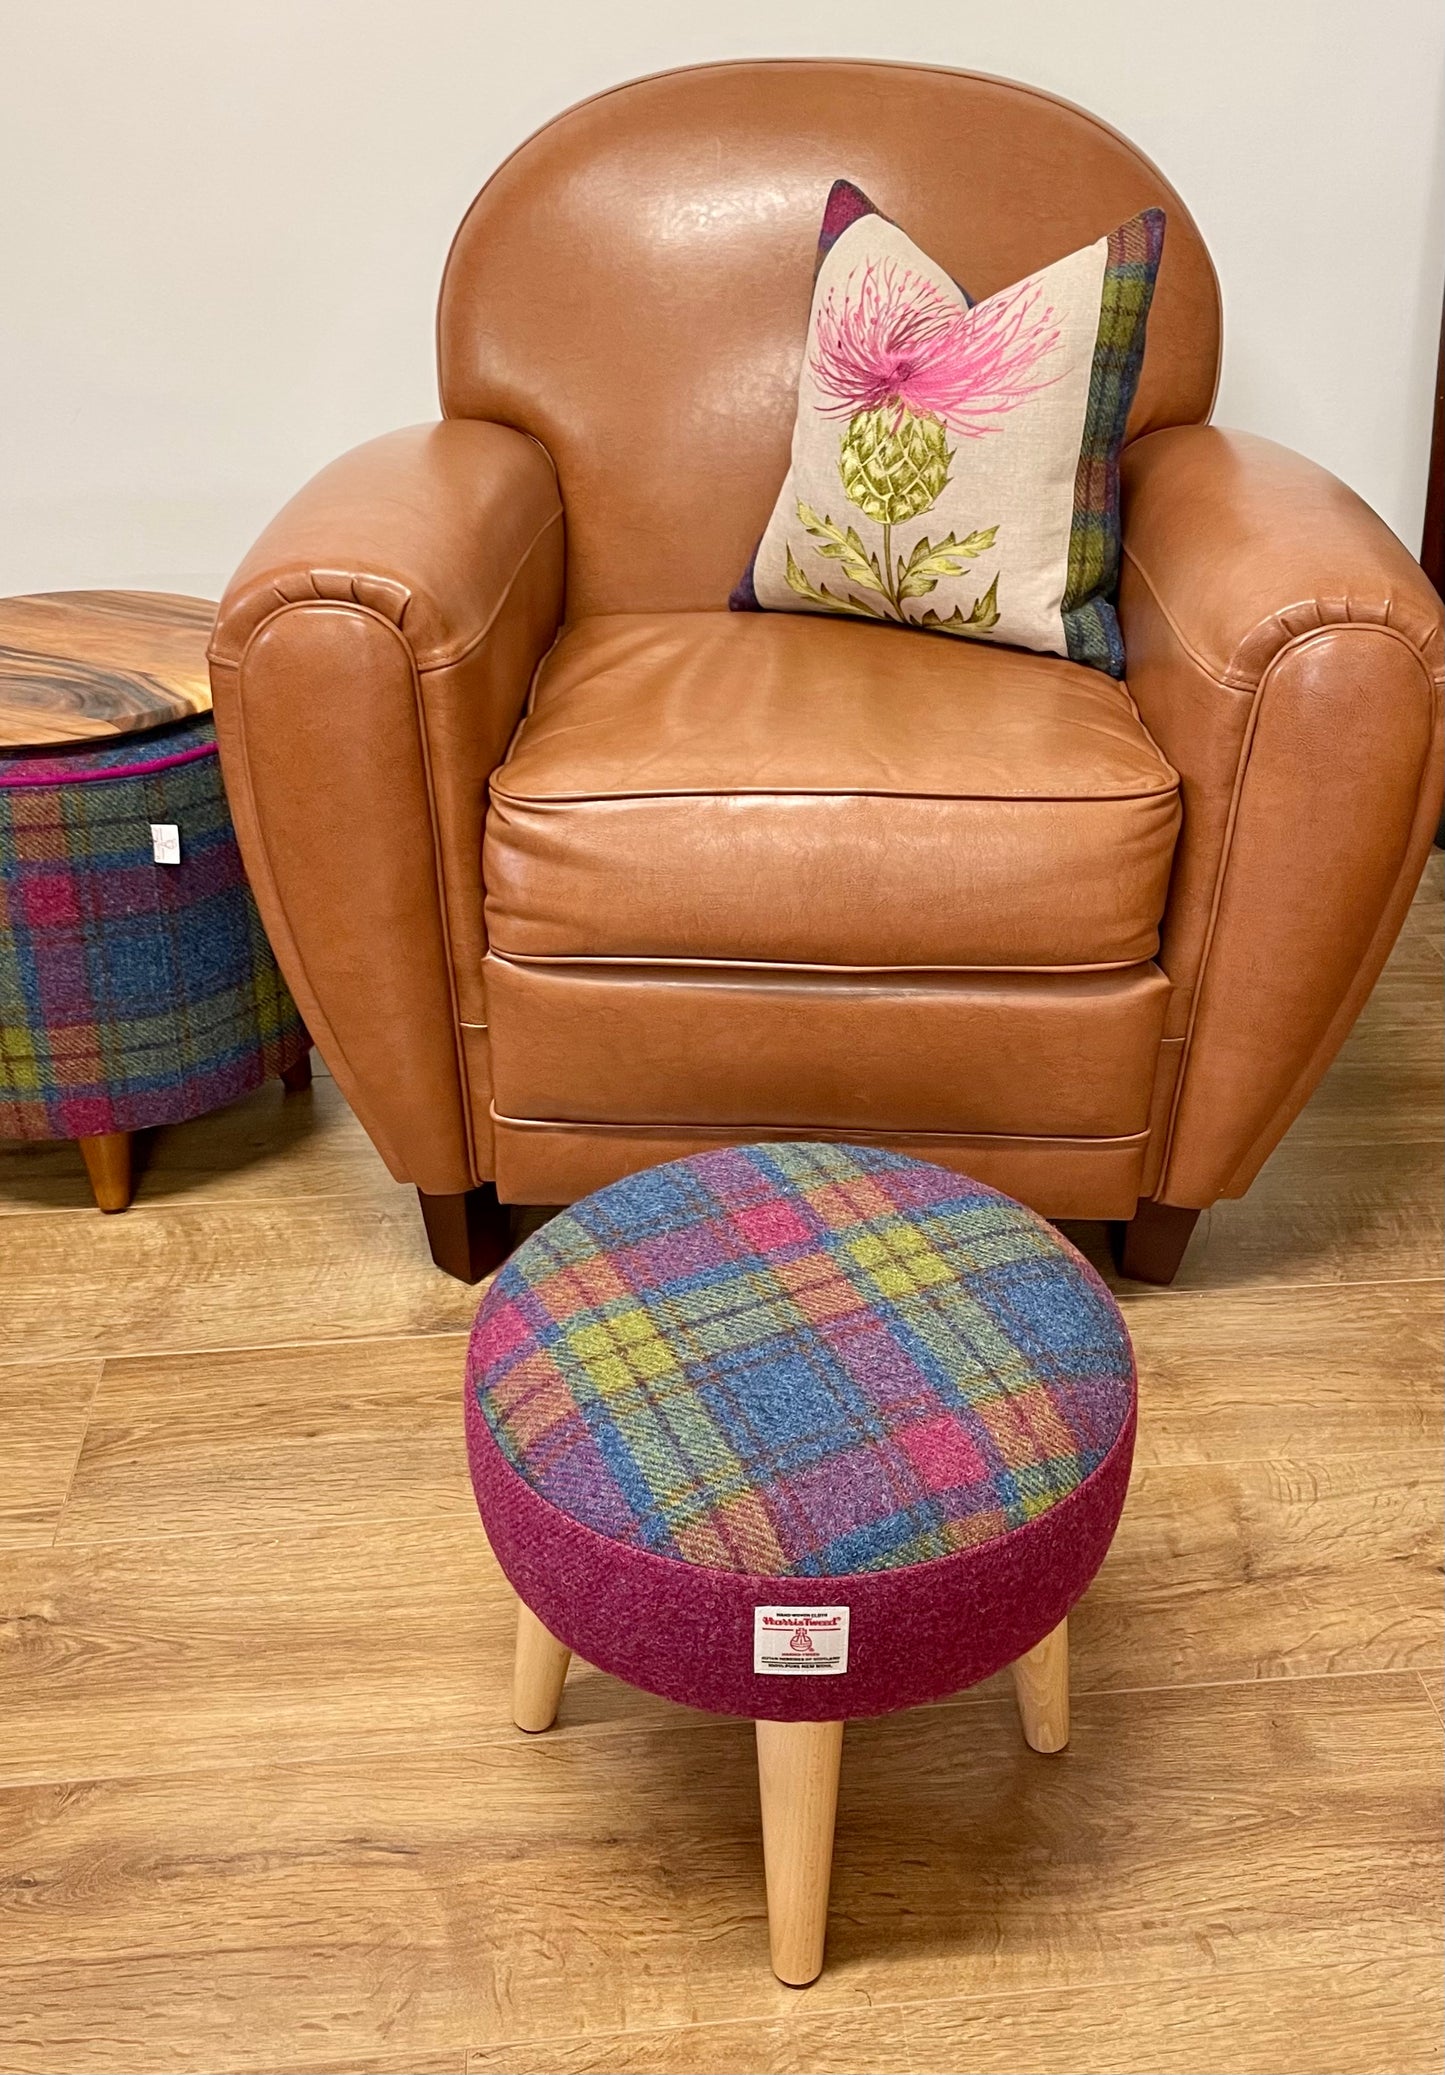 Pink Embroidered Thistle and Tartan Harris Tweed Cushion 16”